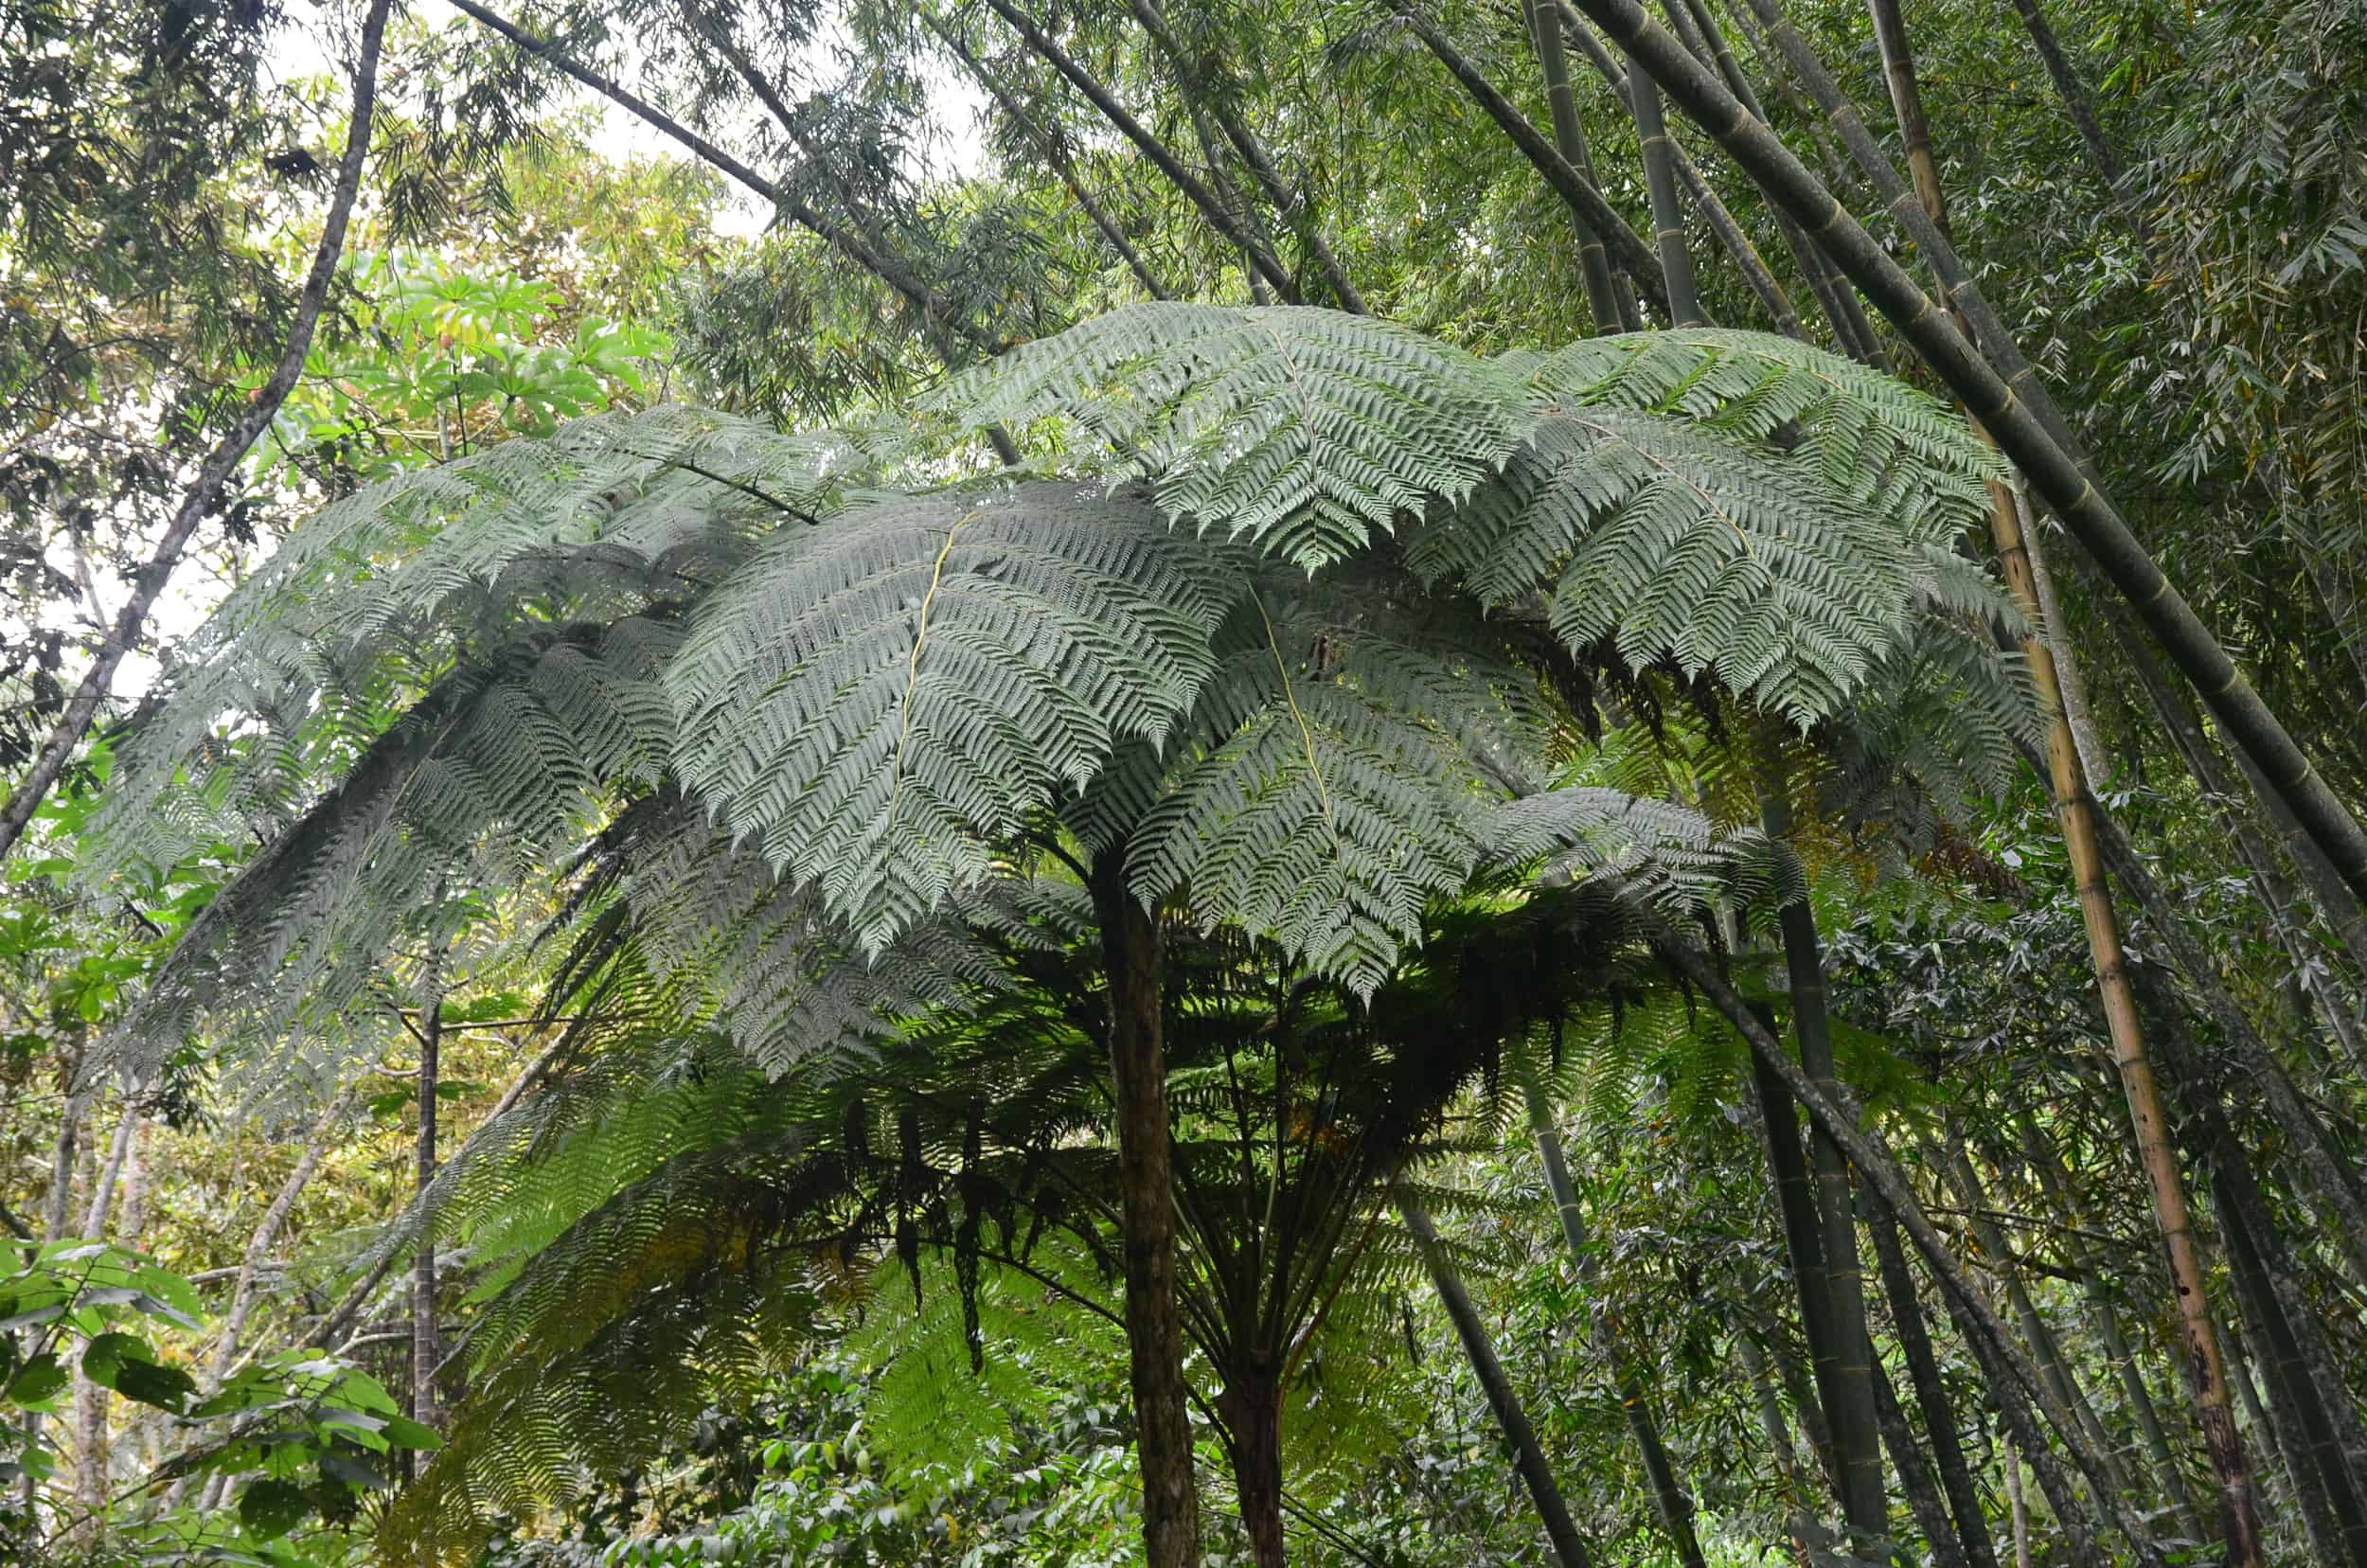 Prehistoric fern on the Bamboo and Guadua Educational Hike in Córdoba, Quindío, Colombia